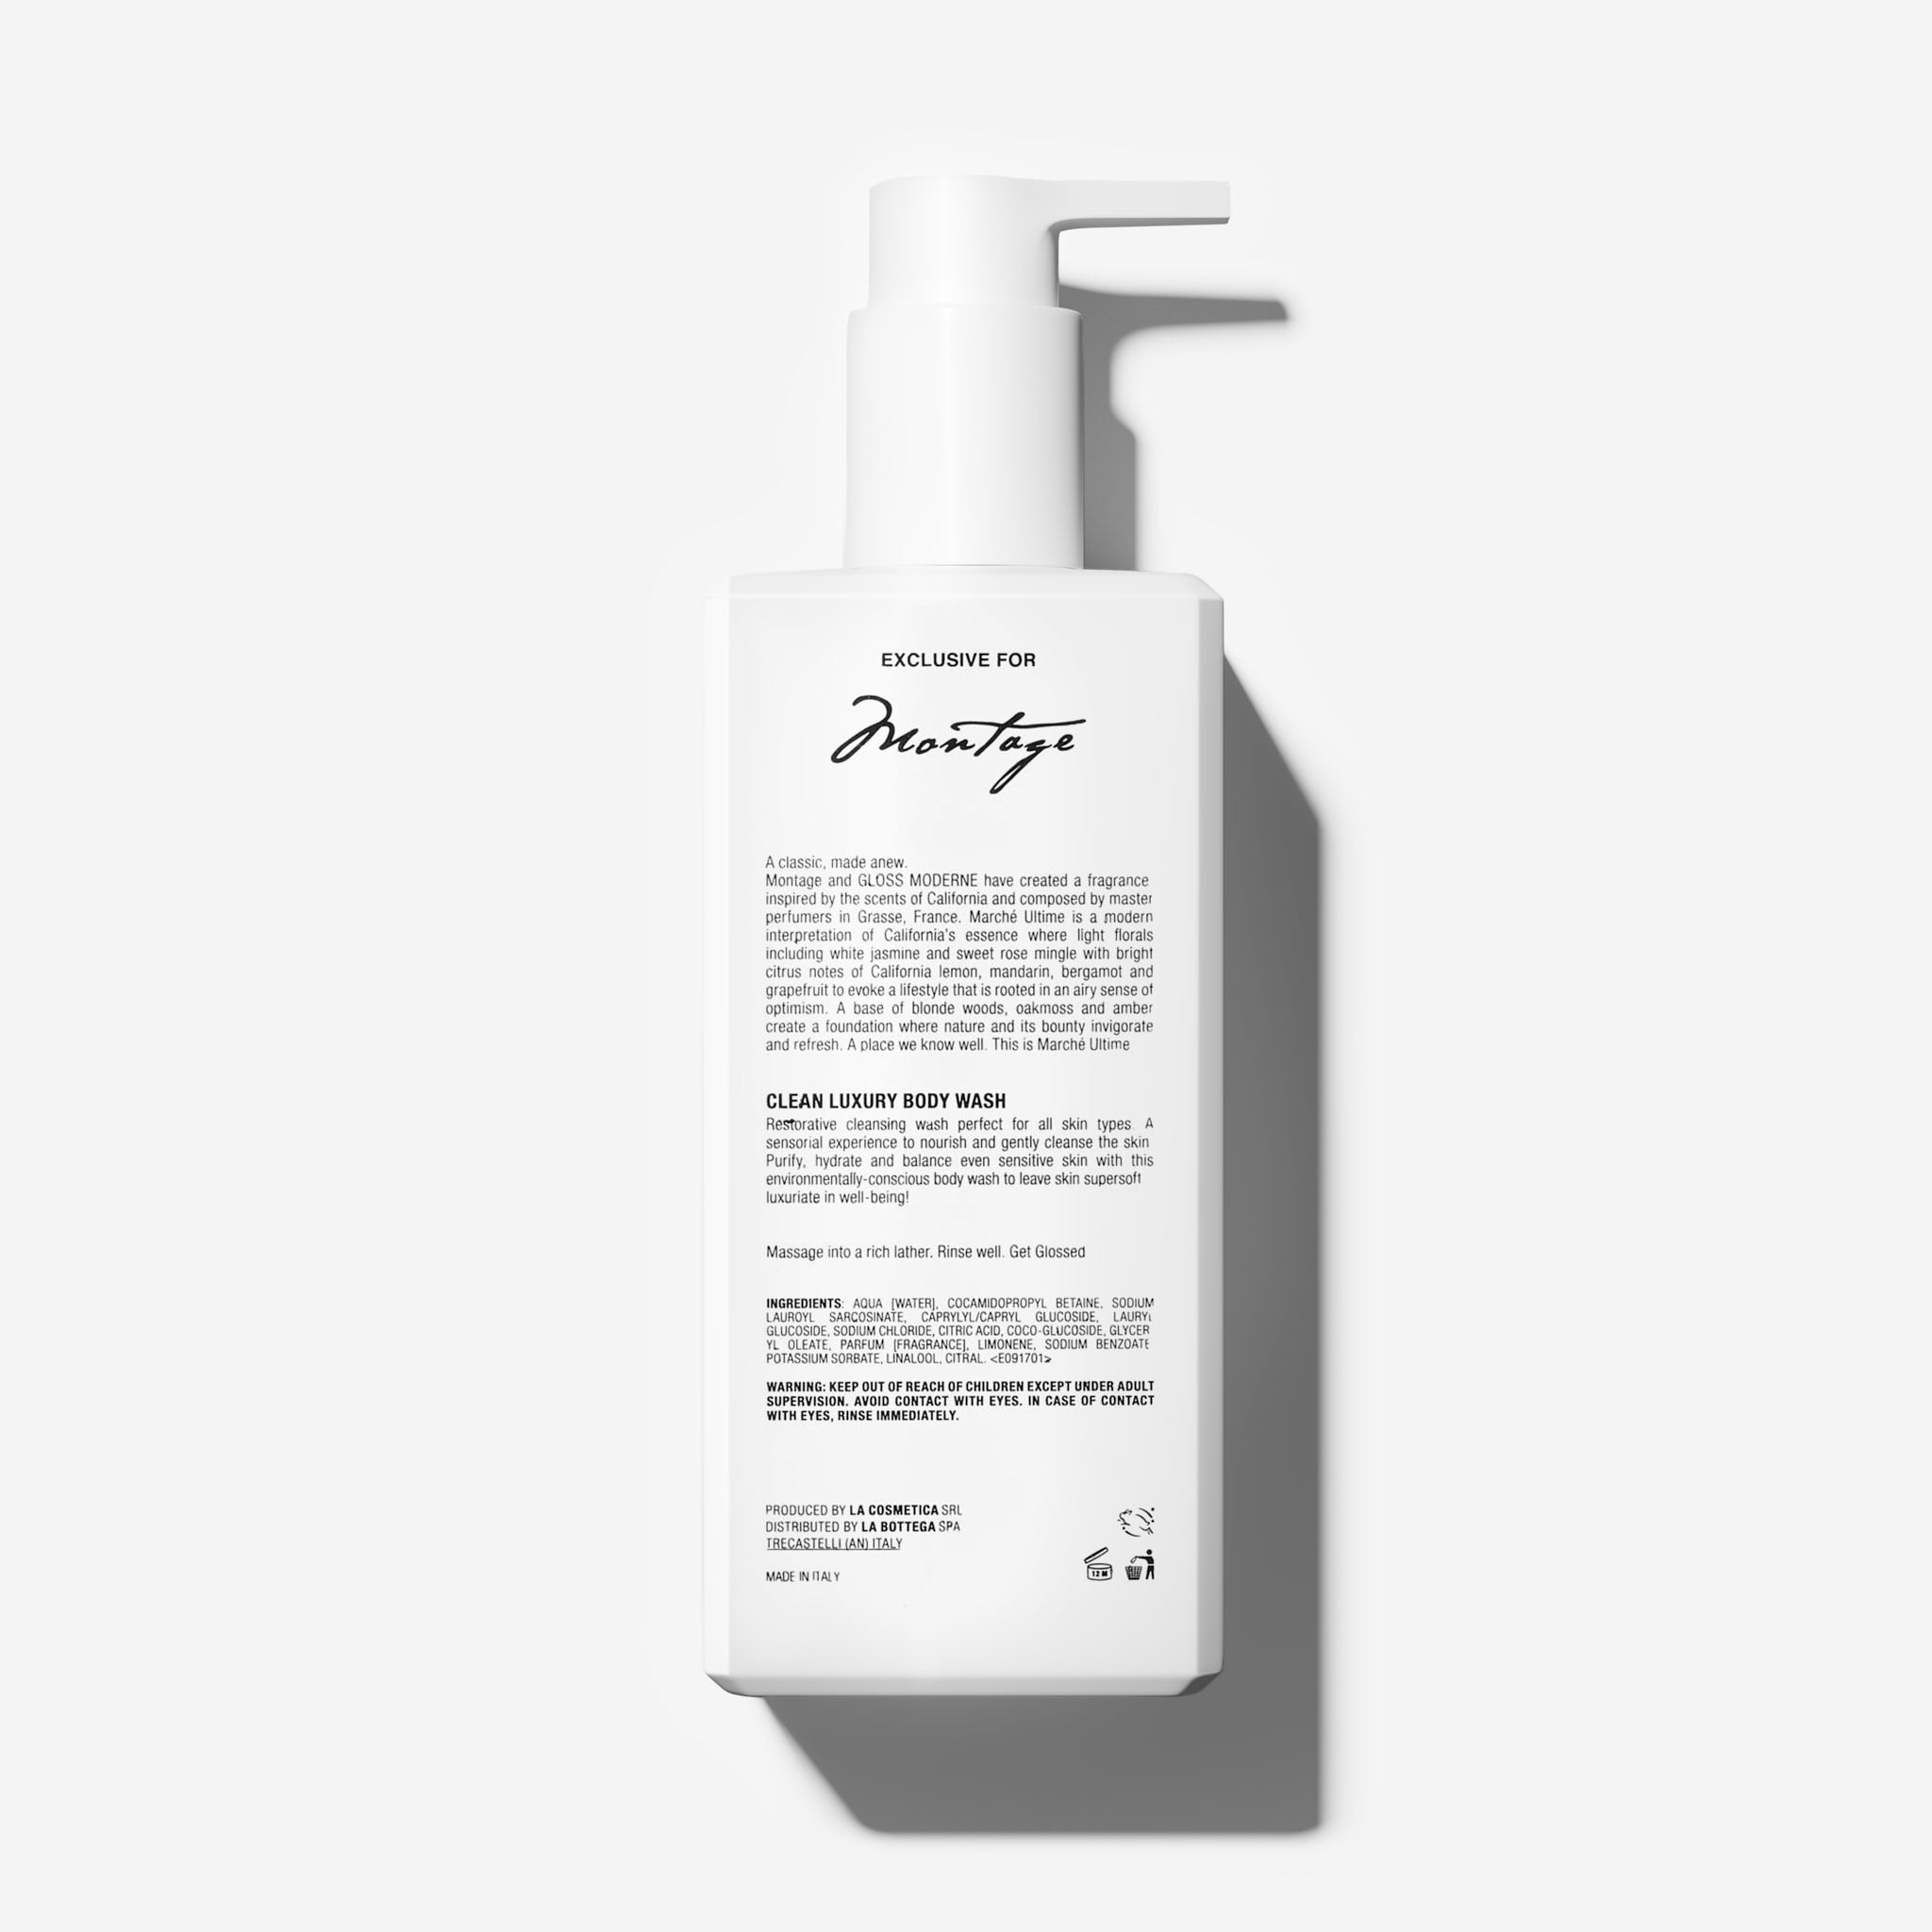 Clean Luxury Body Wash - Marche Ultime (400mL)